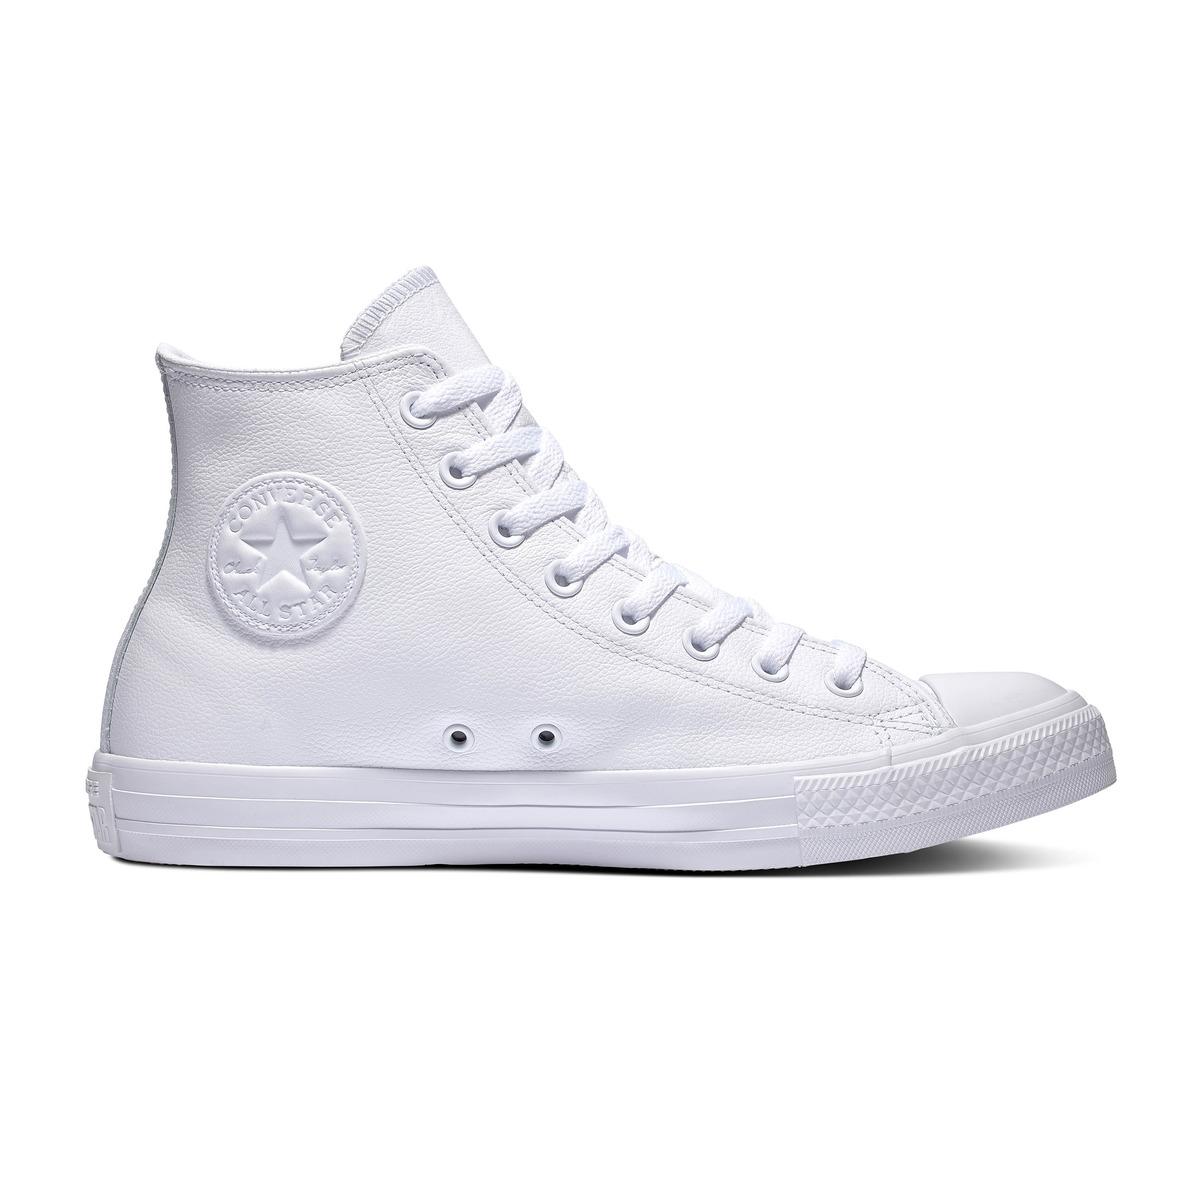 Converse Chuck Taylor All Star Leather High Unisex Casual Trainers in ...